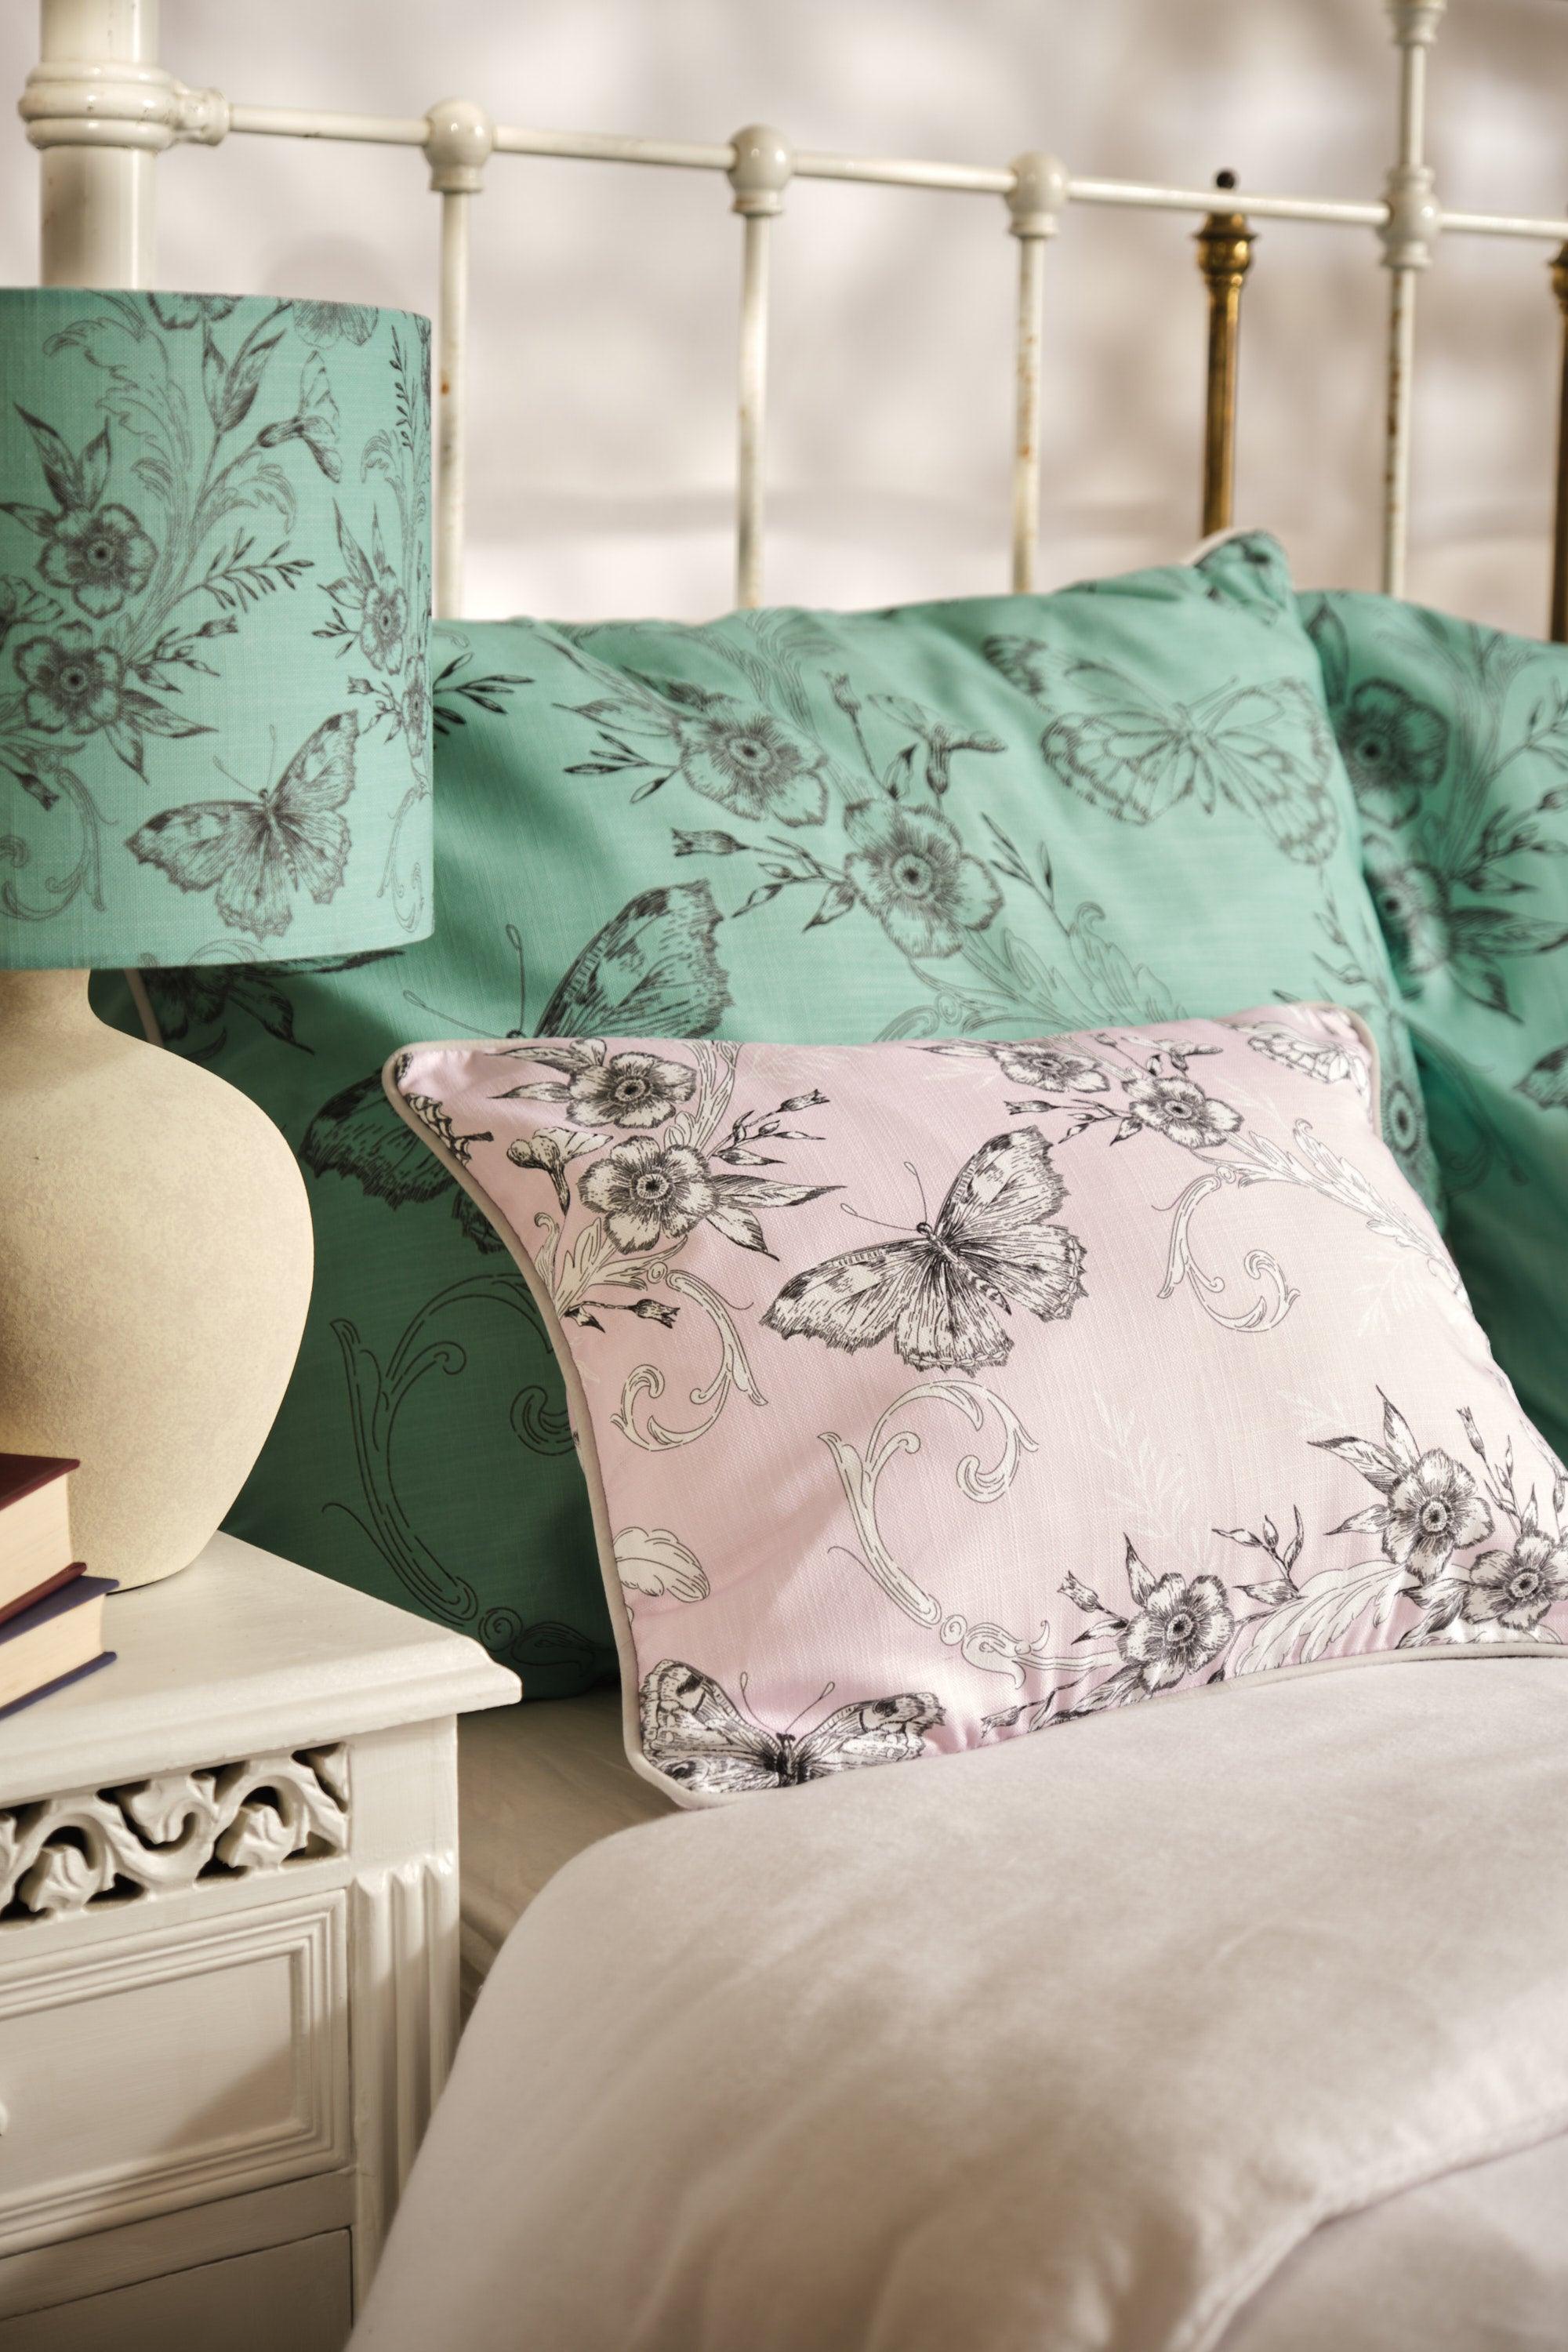 Trailing Butterfly Light Pink - House Of Turnowsky Cushion